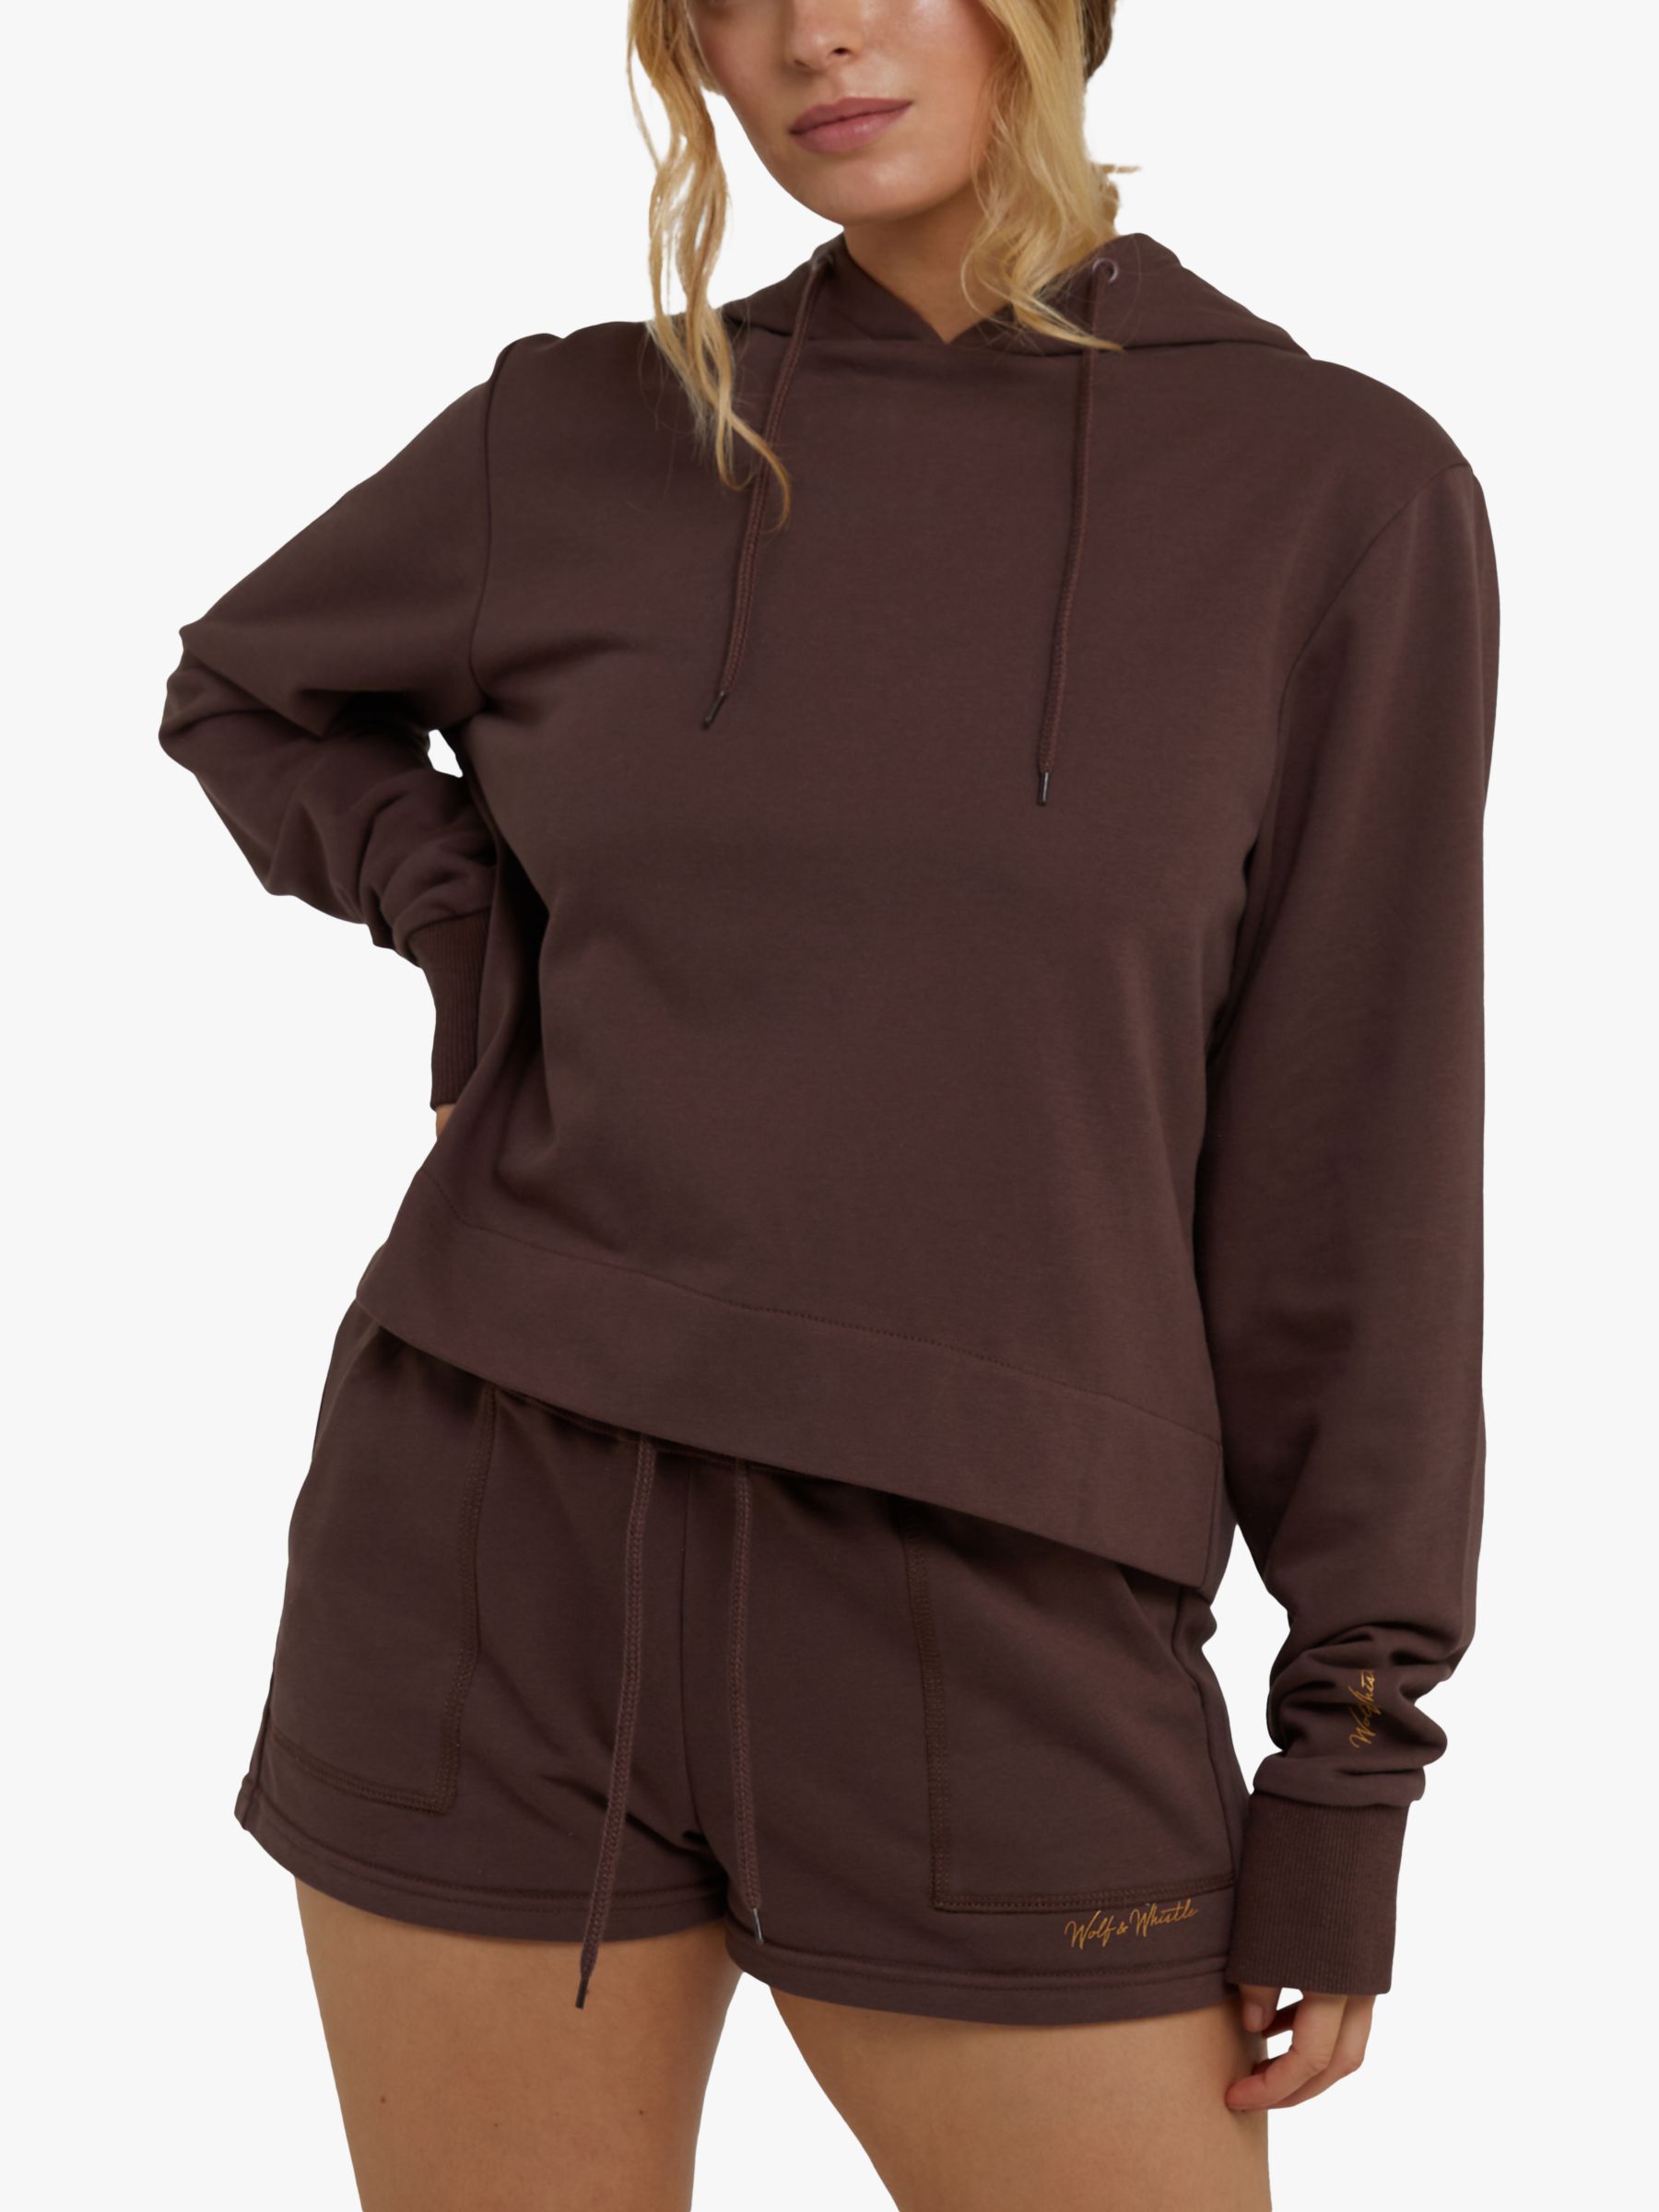 Buy Wolf & Whistle Cropped Hooded Top, Brown Online at johnlewis.com